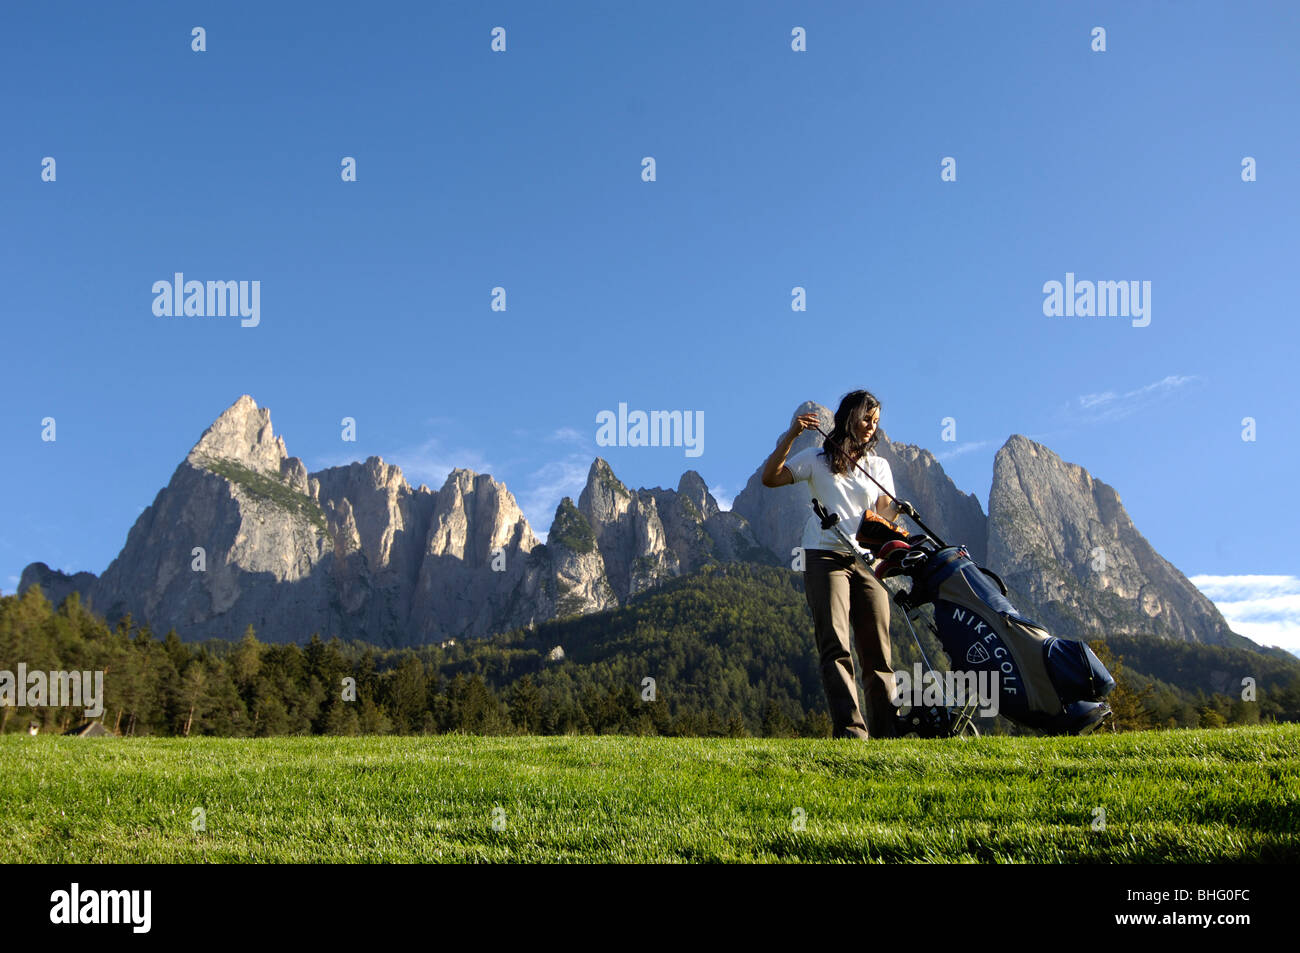 A woman pulling a club out of her golf bag, Golf court Kastelruth Alpe di Siusi, Sciliar, South Tyrol, Italy, Europe Stock Photo